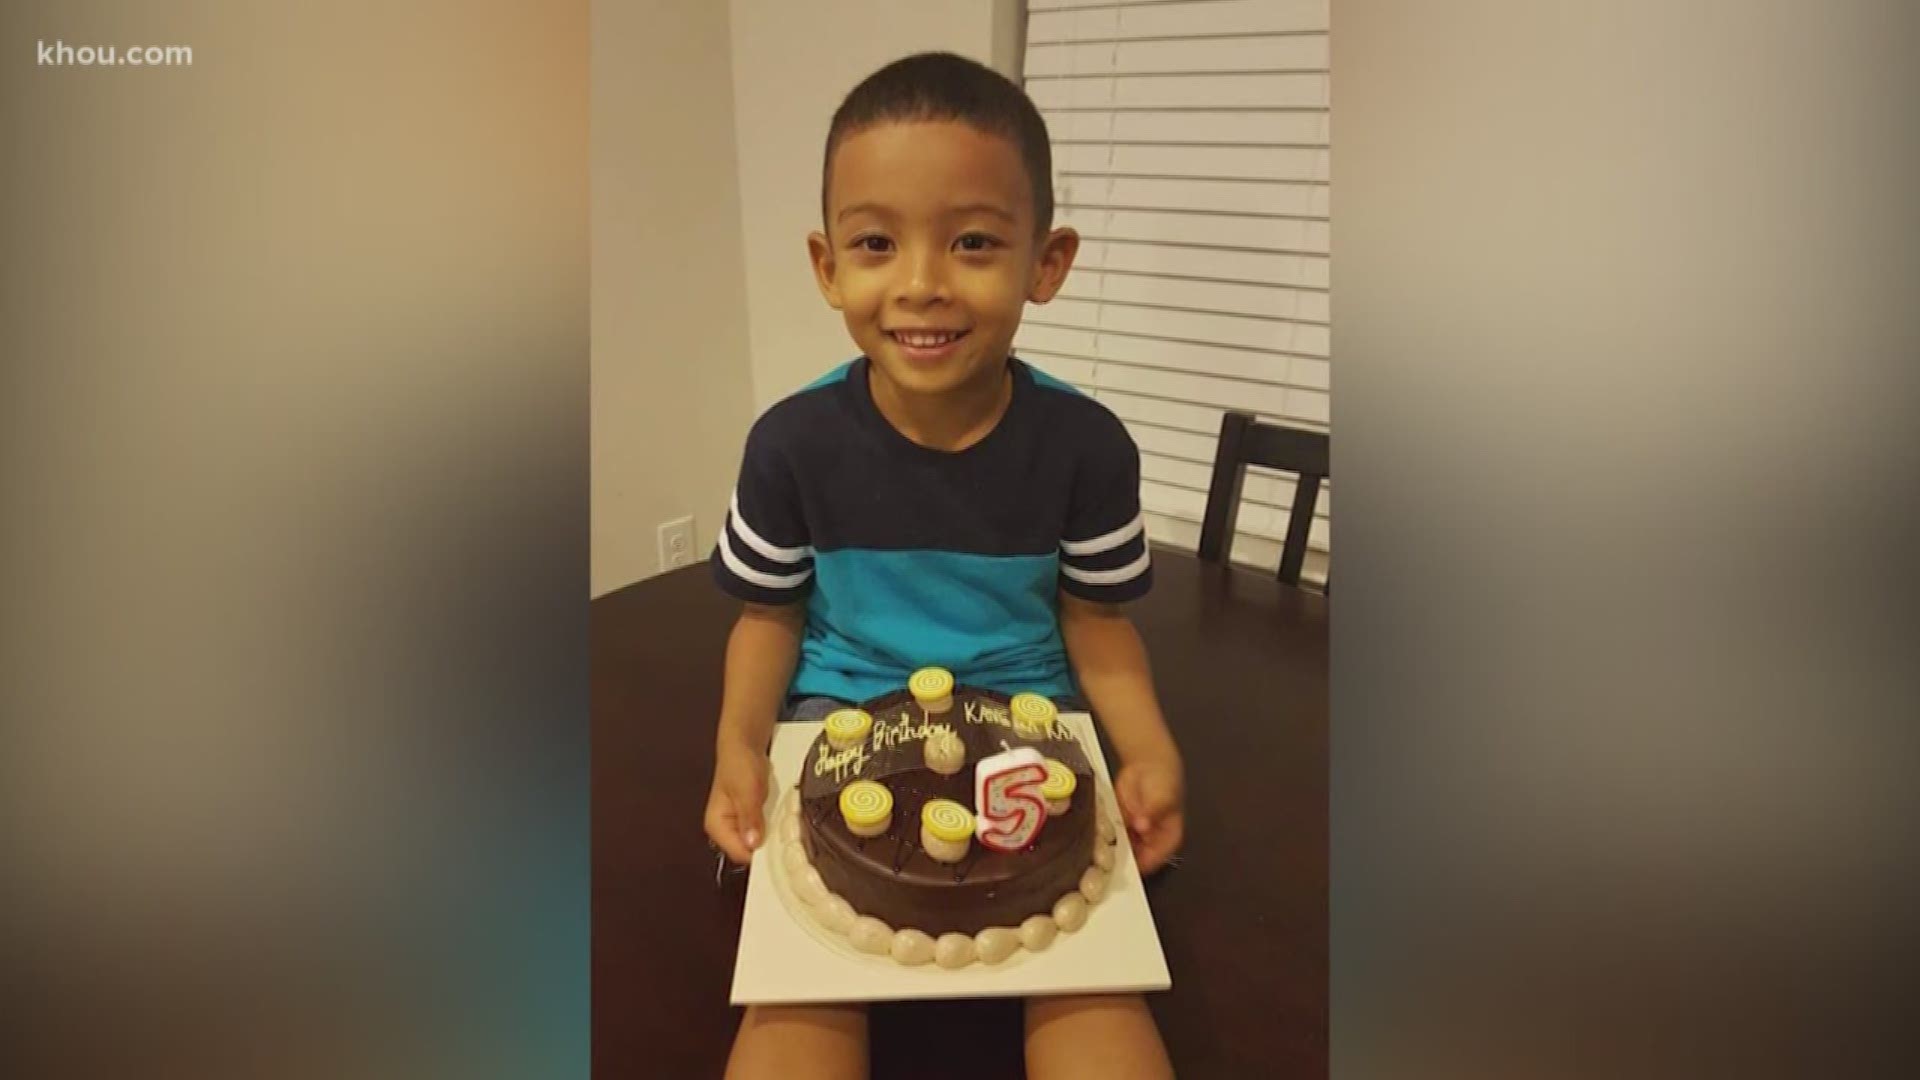 After a boy drowned in a neighborhood pool in Katy, his family is now filing a lawsuit against the subdivision and the lifeguard on duty at the time.